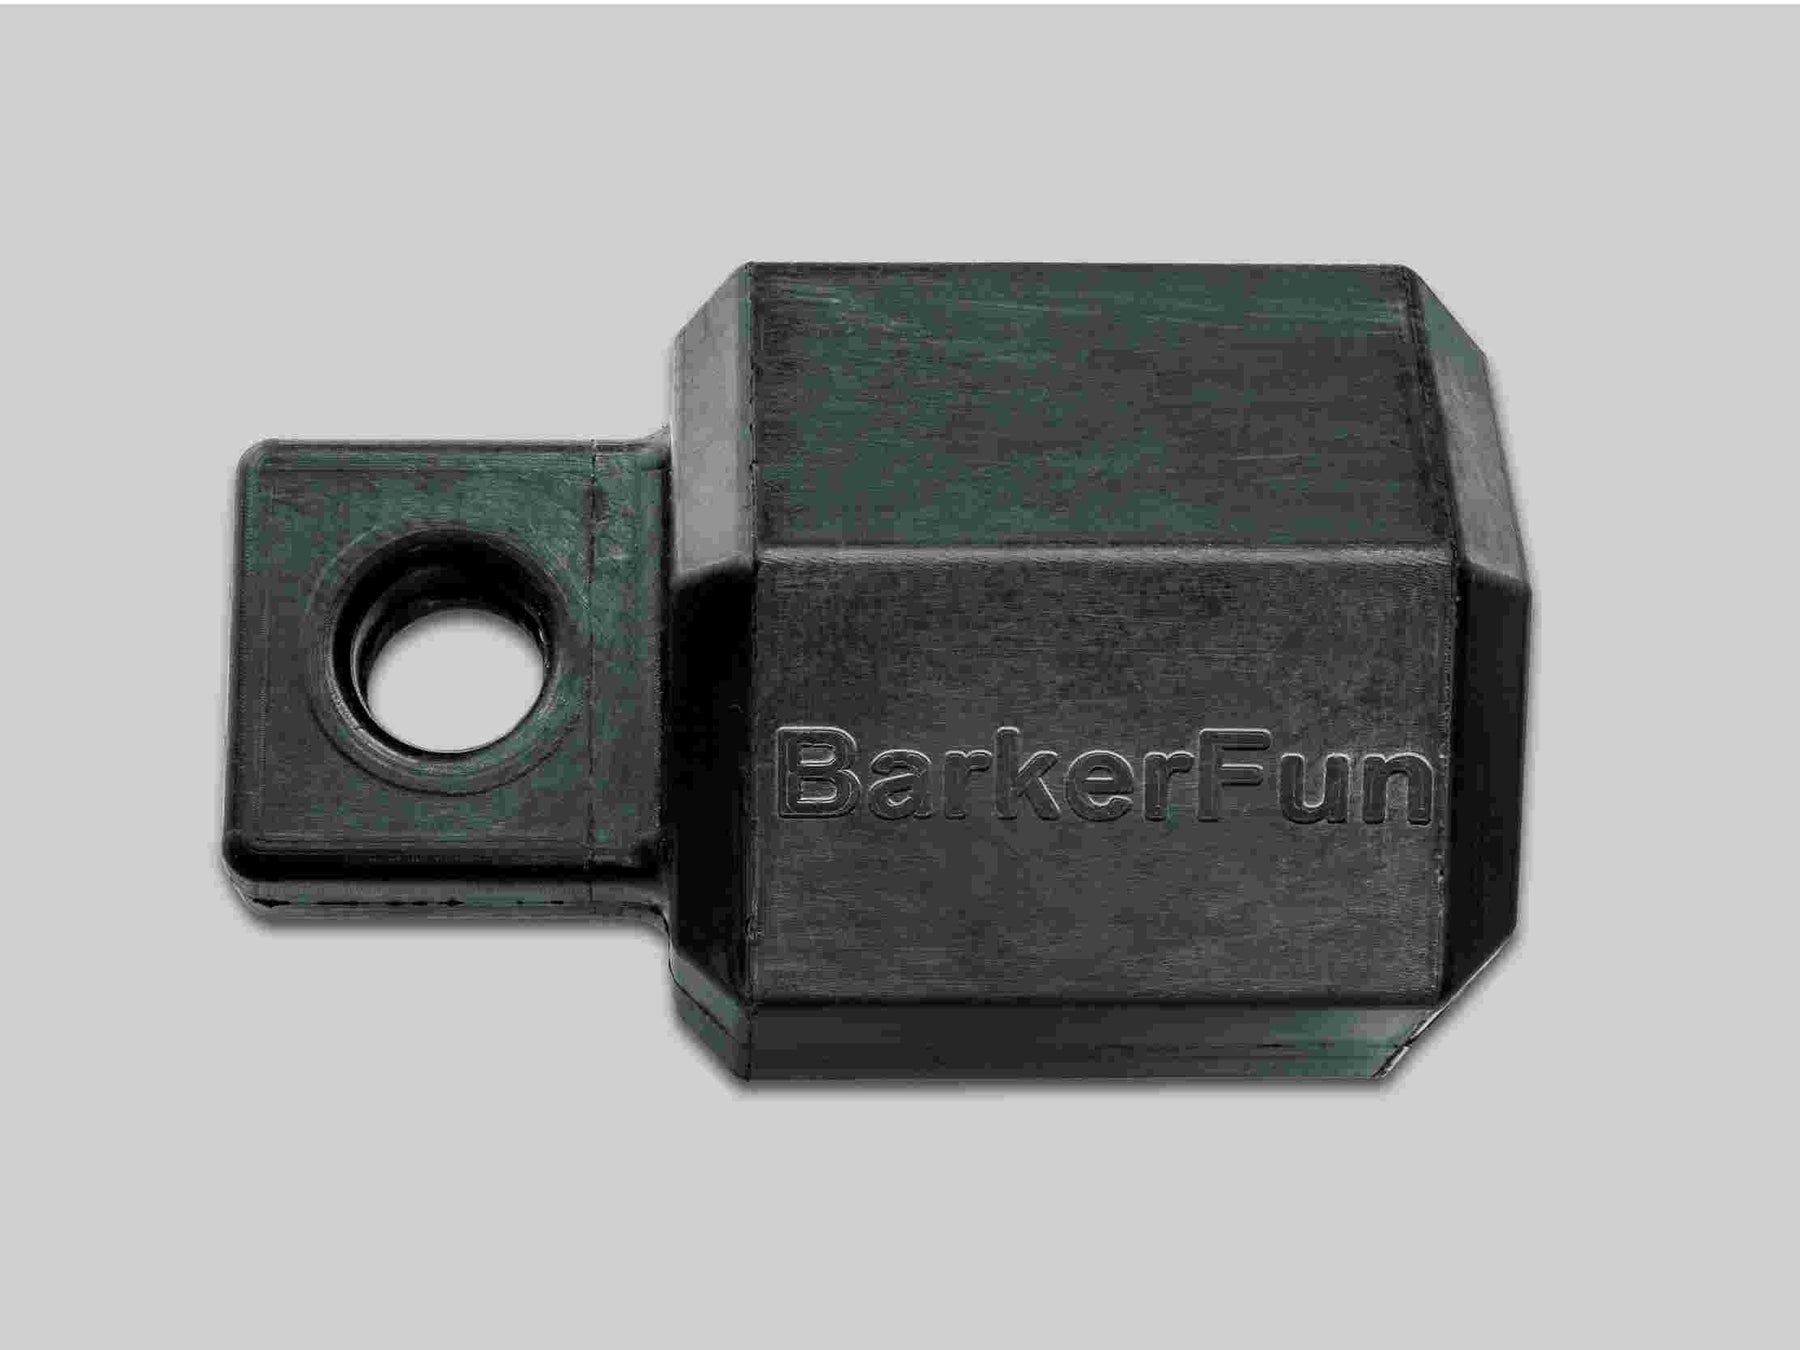 Black rubber dog treat dispenser with BarkerFun stamped on it.